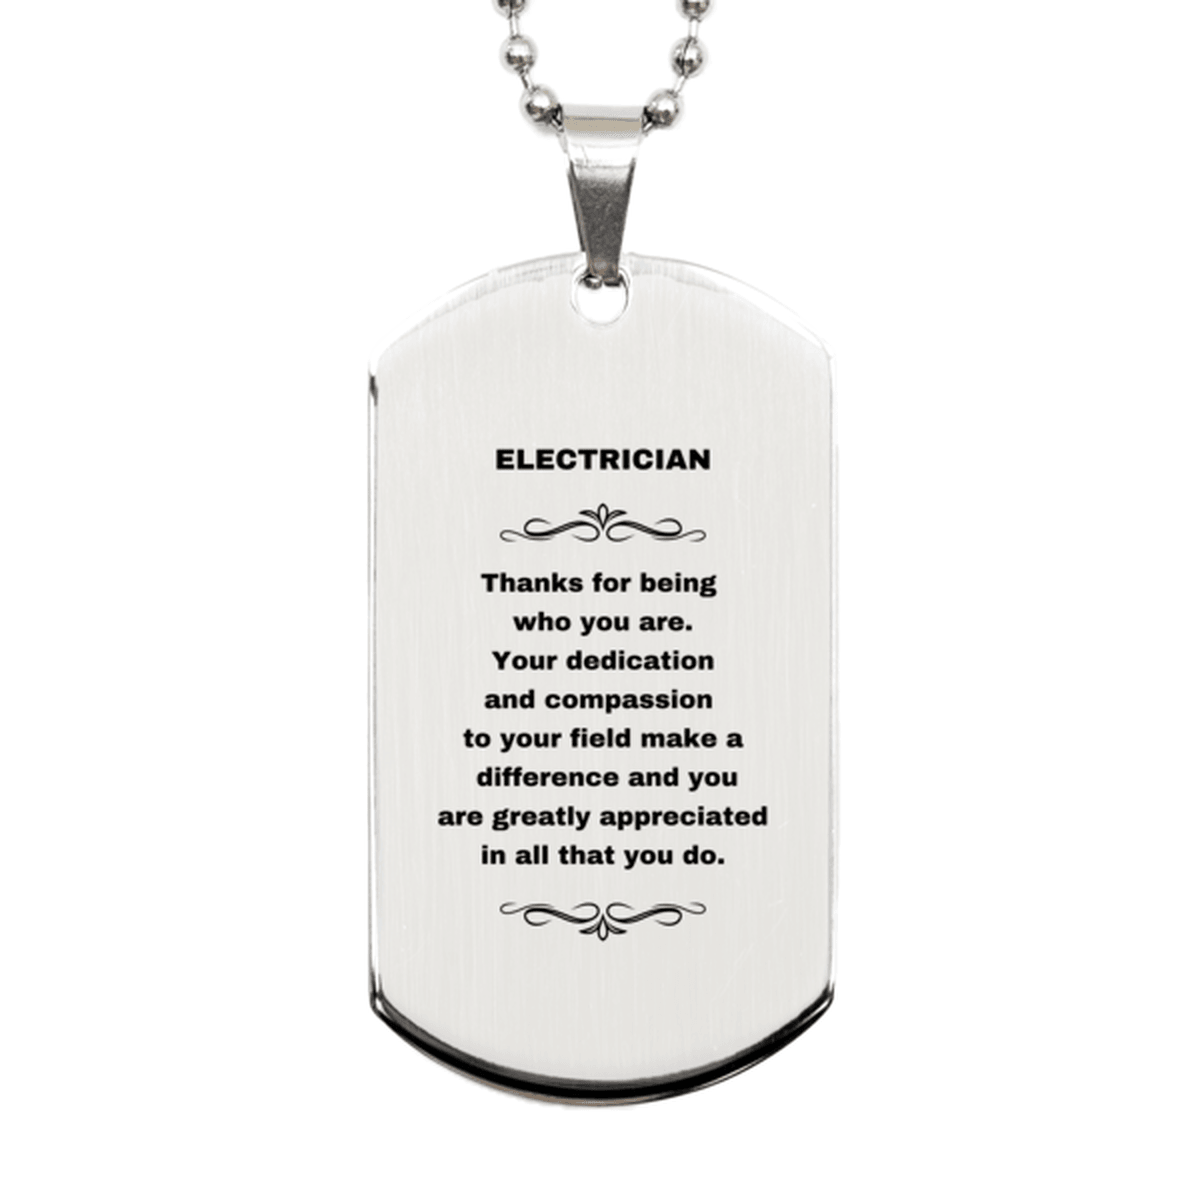 Electrician Silver Dog Tag Necklace Engraved Bracelet - Thanks for being who you are - Birthday Christmas Jewelry Gifts Coworkers Colleague Boss - Mallard Moon Gift Shop